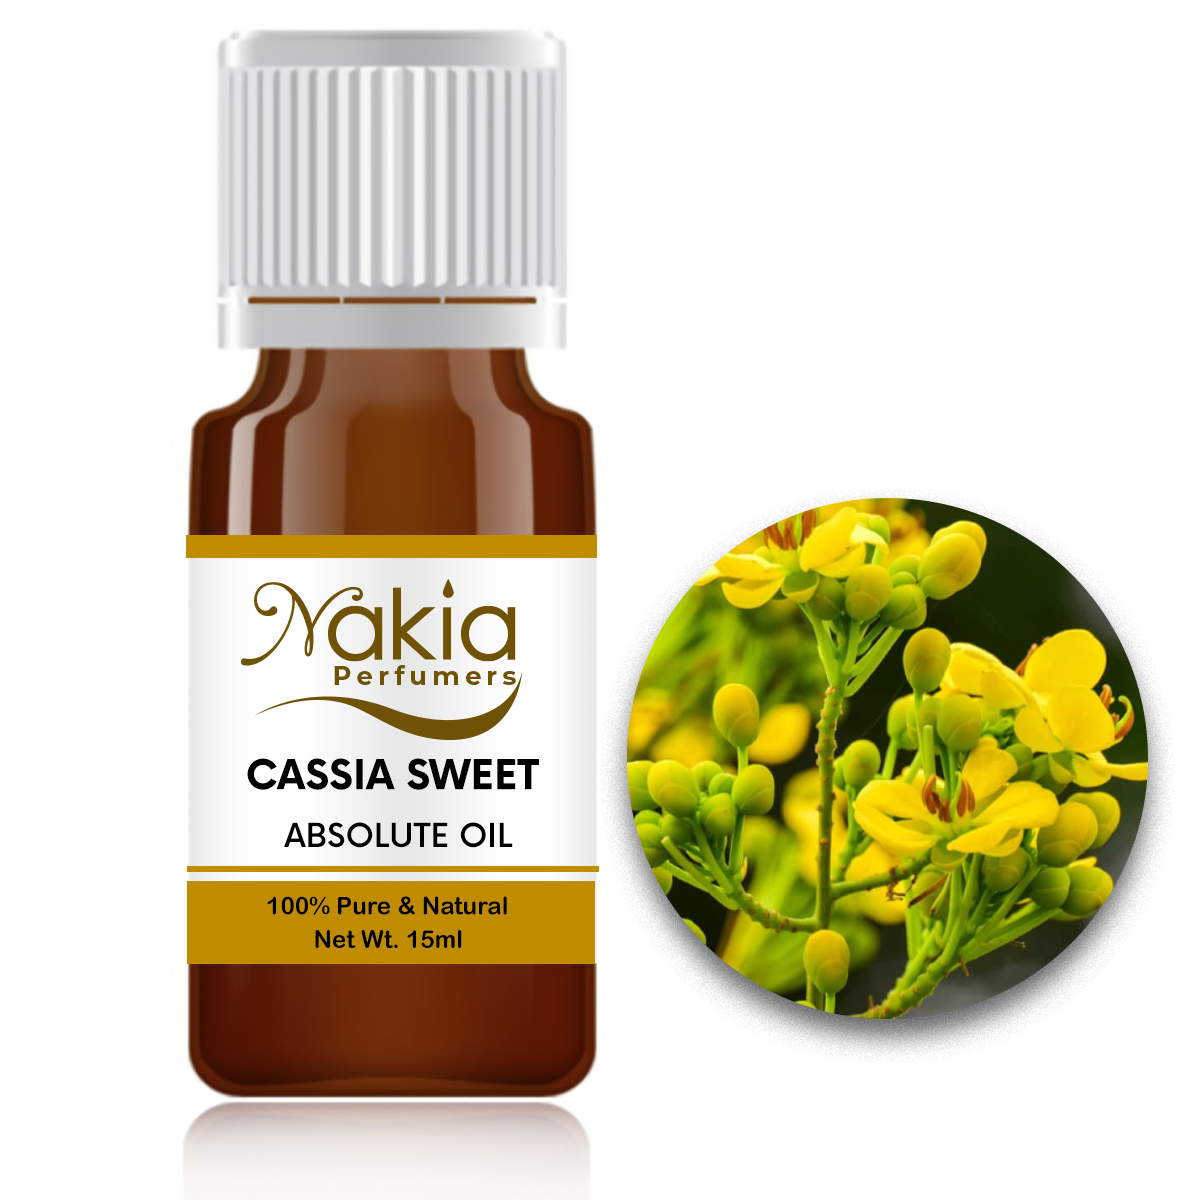 CASSIA-SWEET ABSOLUTE OIL